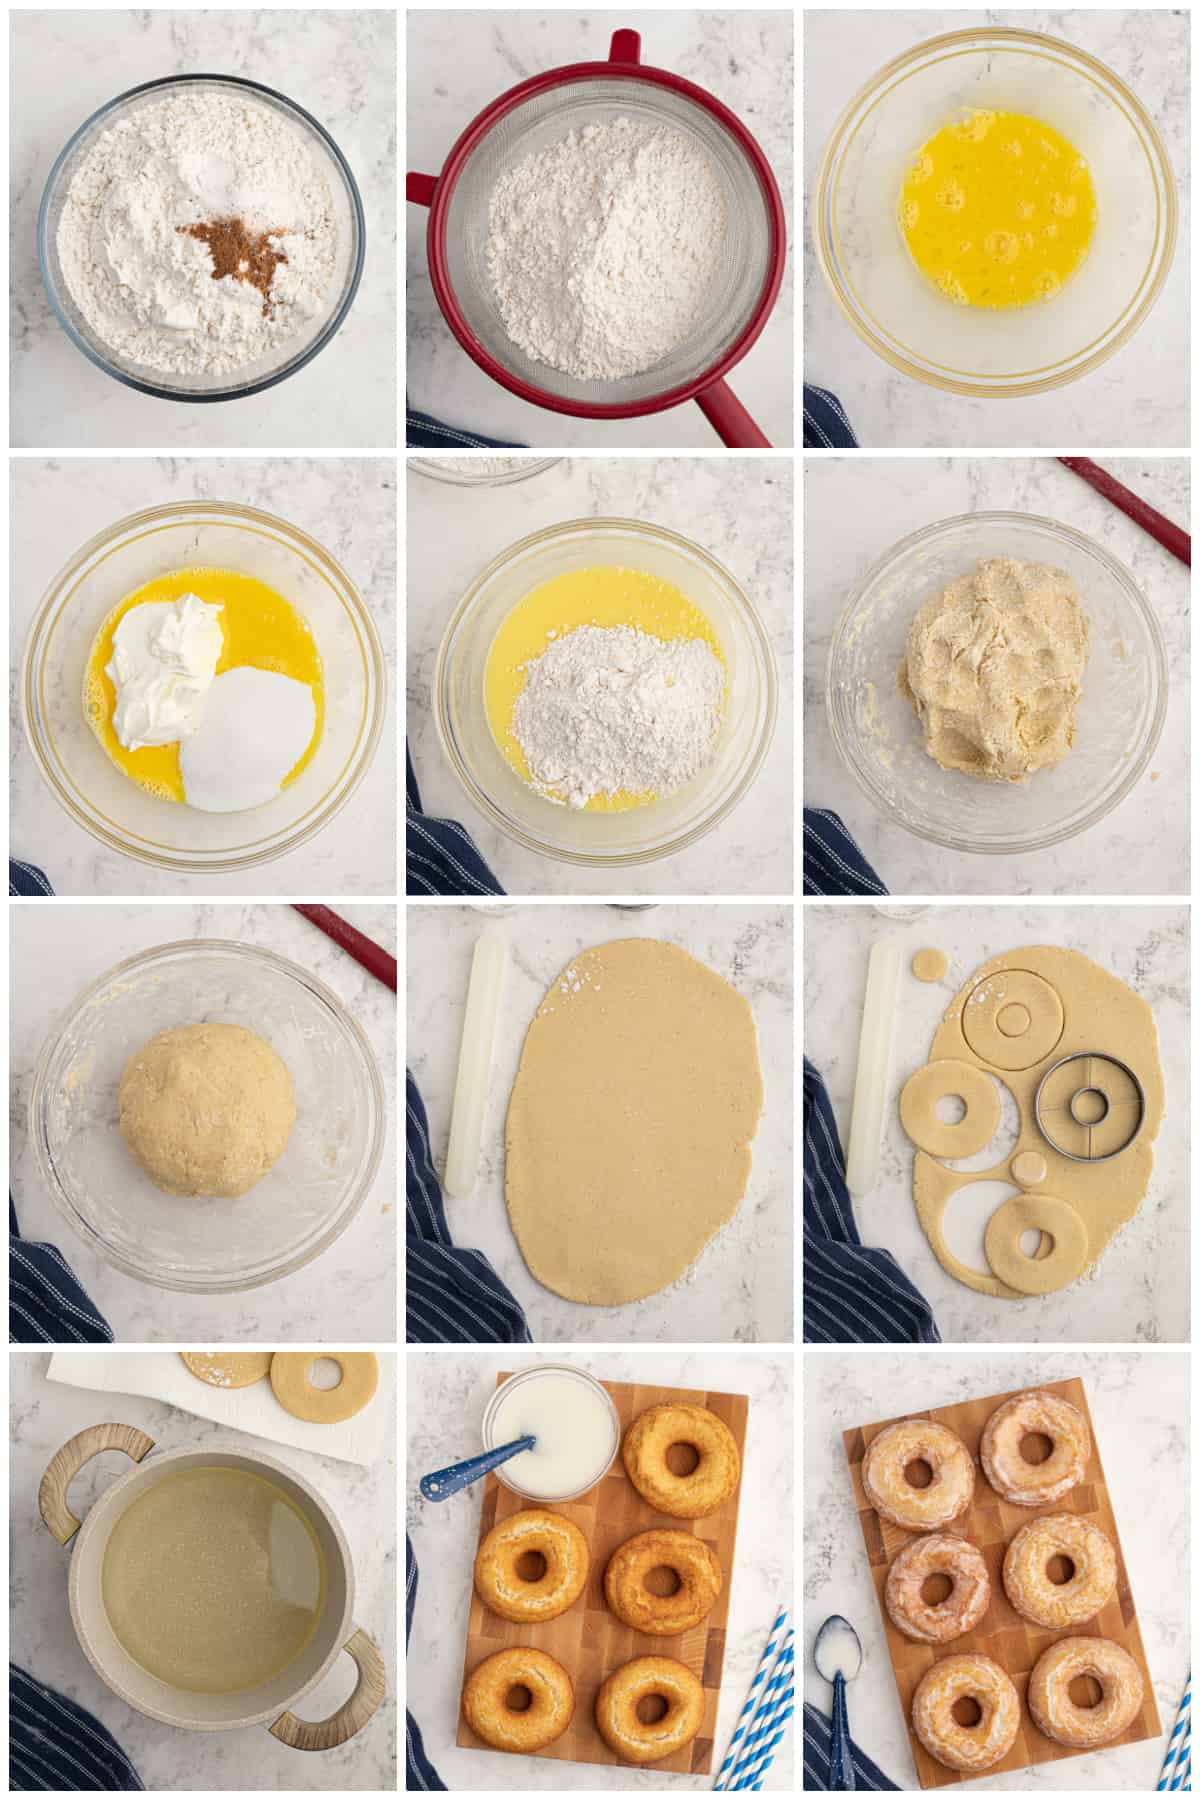 Step by step photos on how to make Old Fashioned Donuts.